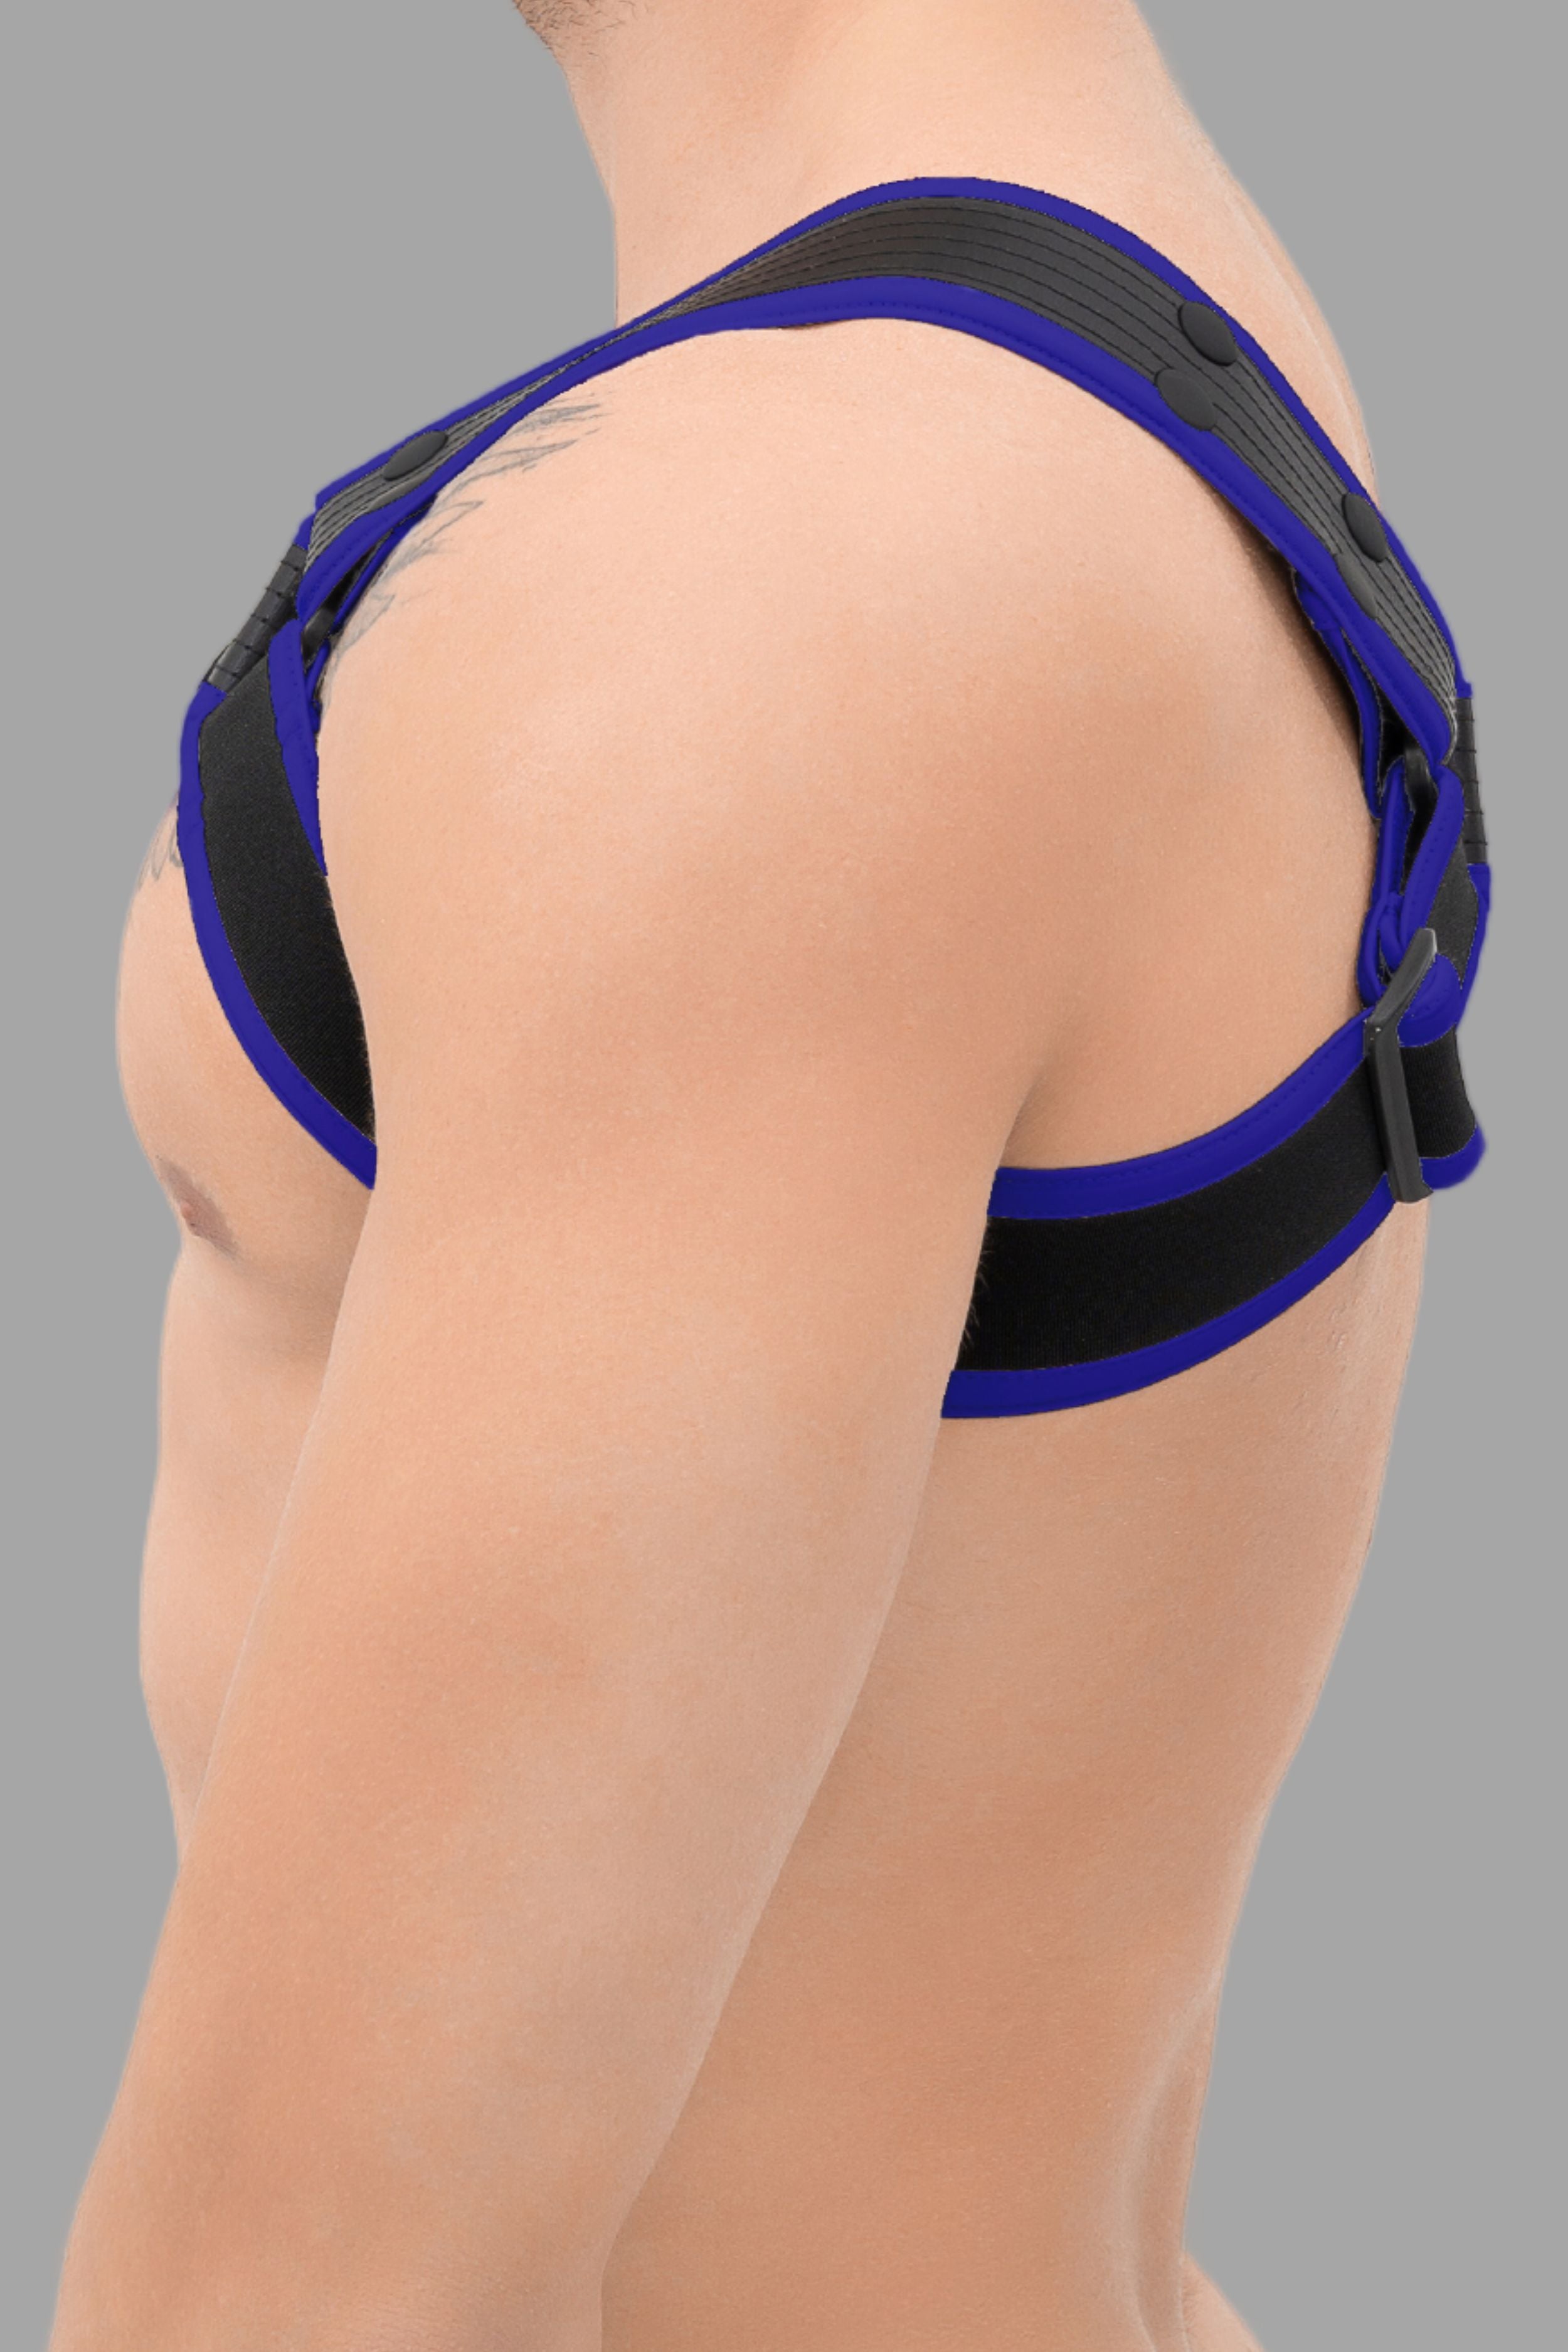 Outtox. Body Harness with Snaps. Black+Blue &